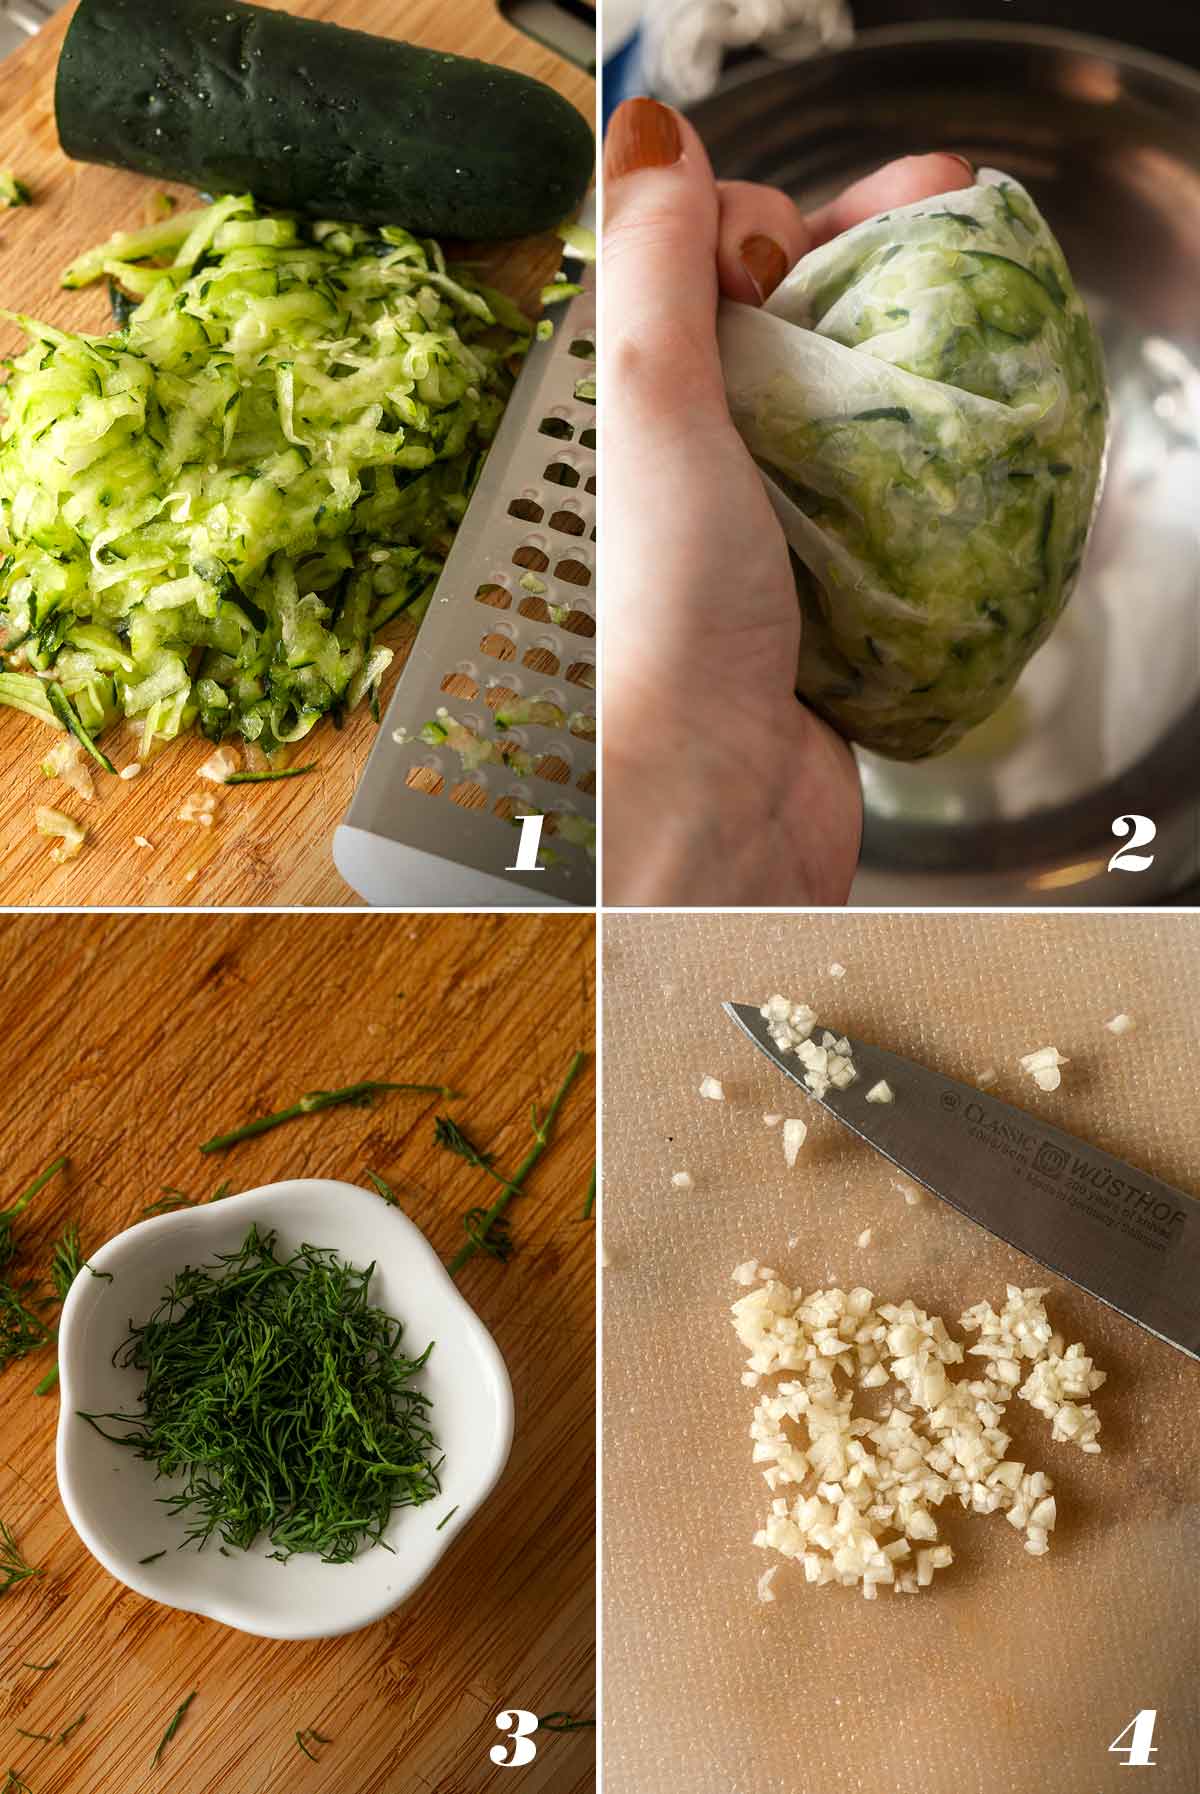 A collage of 4 numbered images showing how to prepare ingredients for tzatziki.